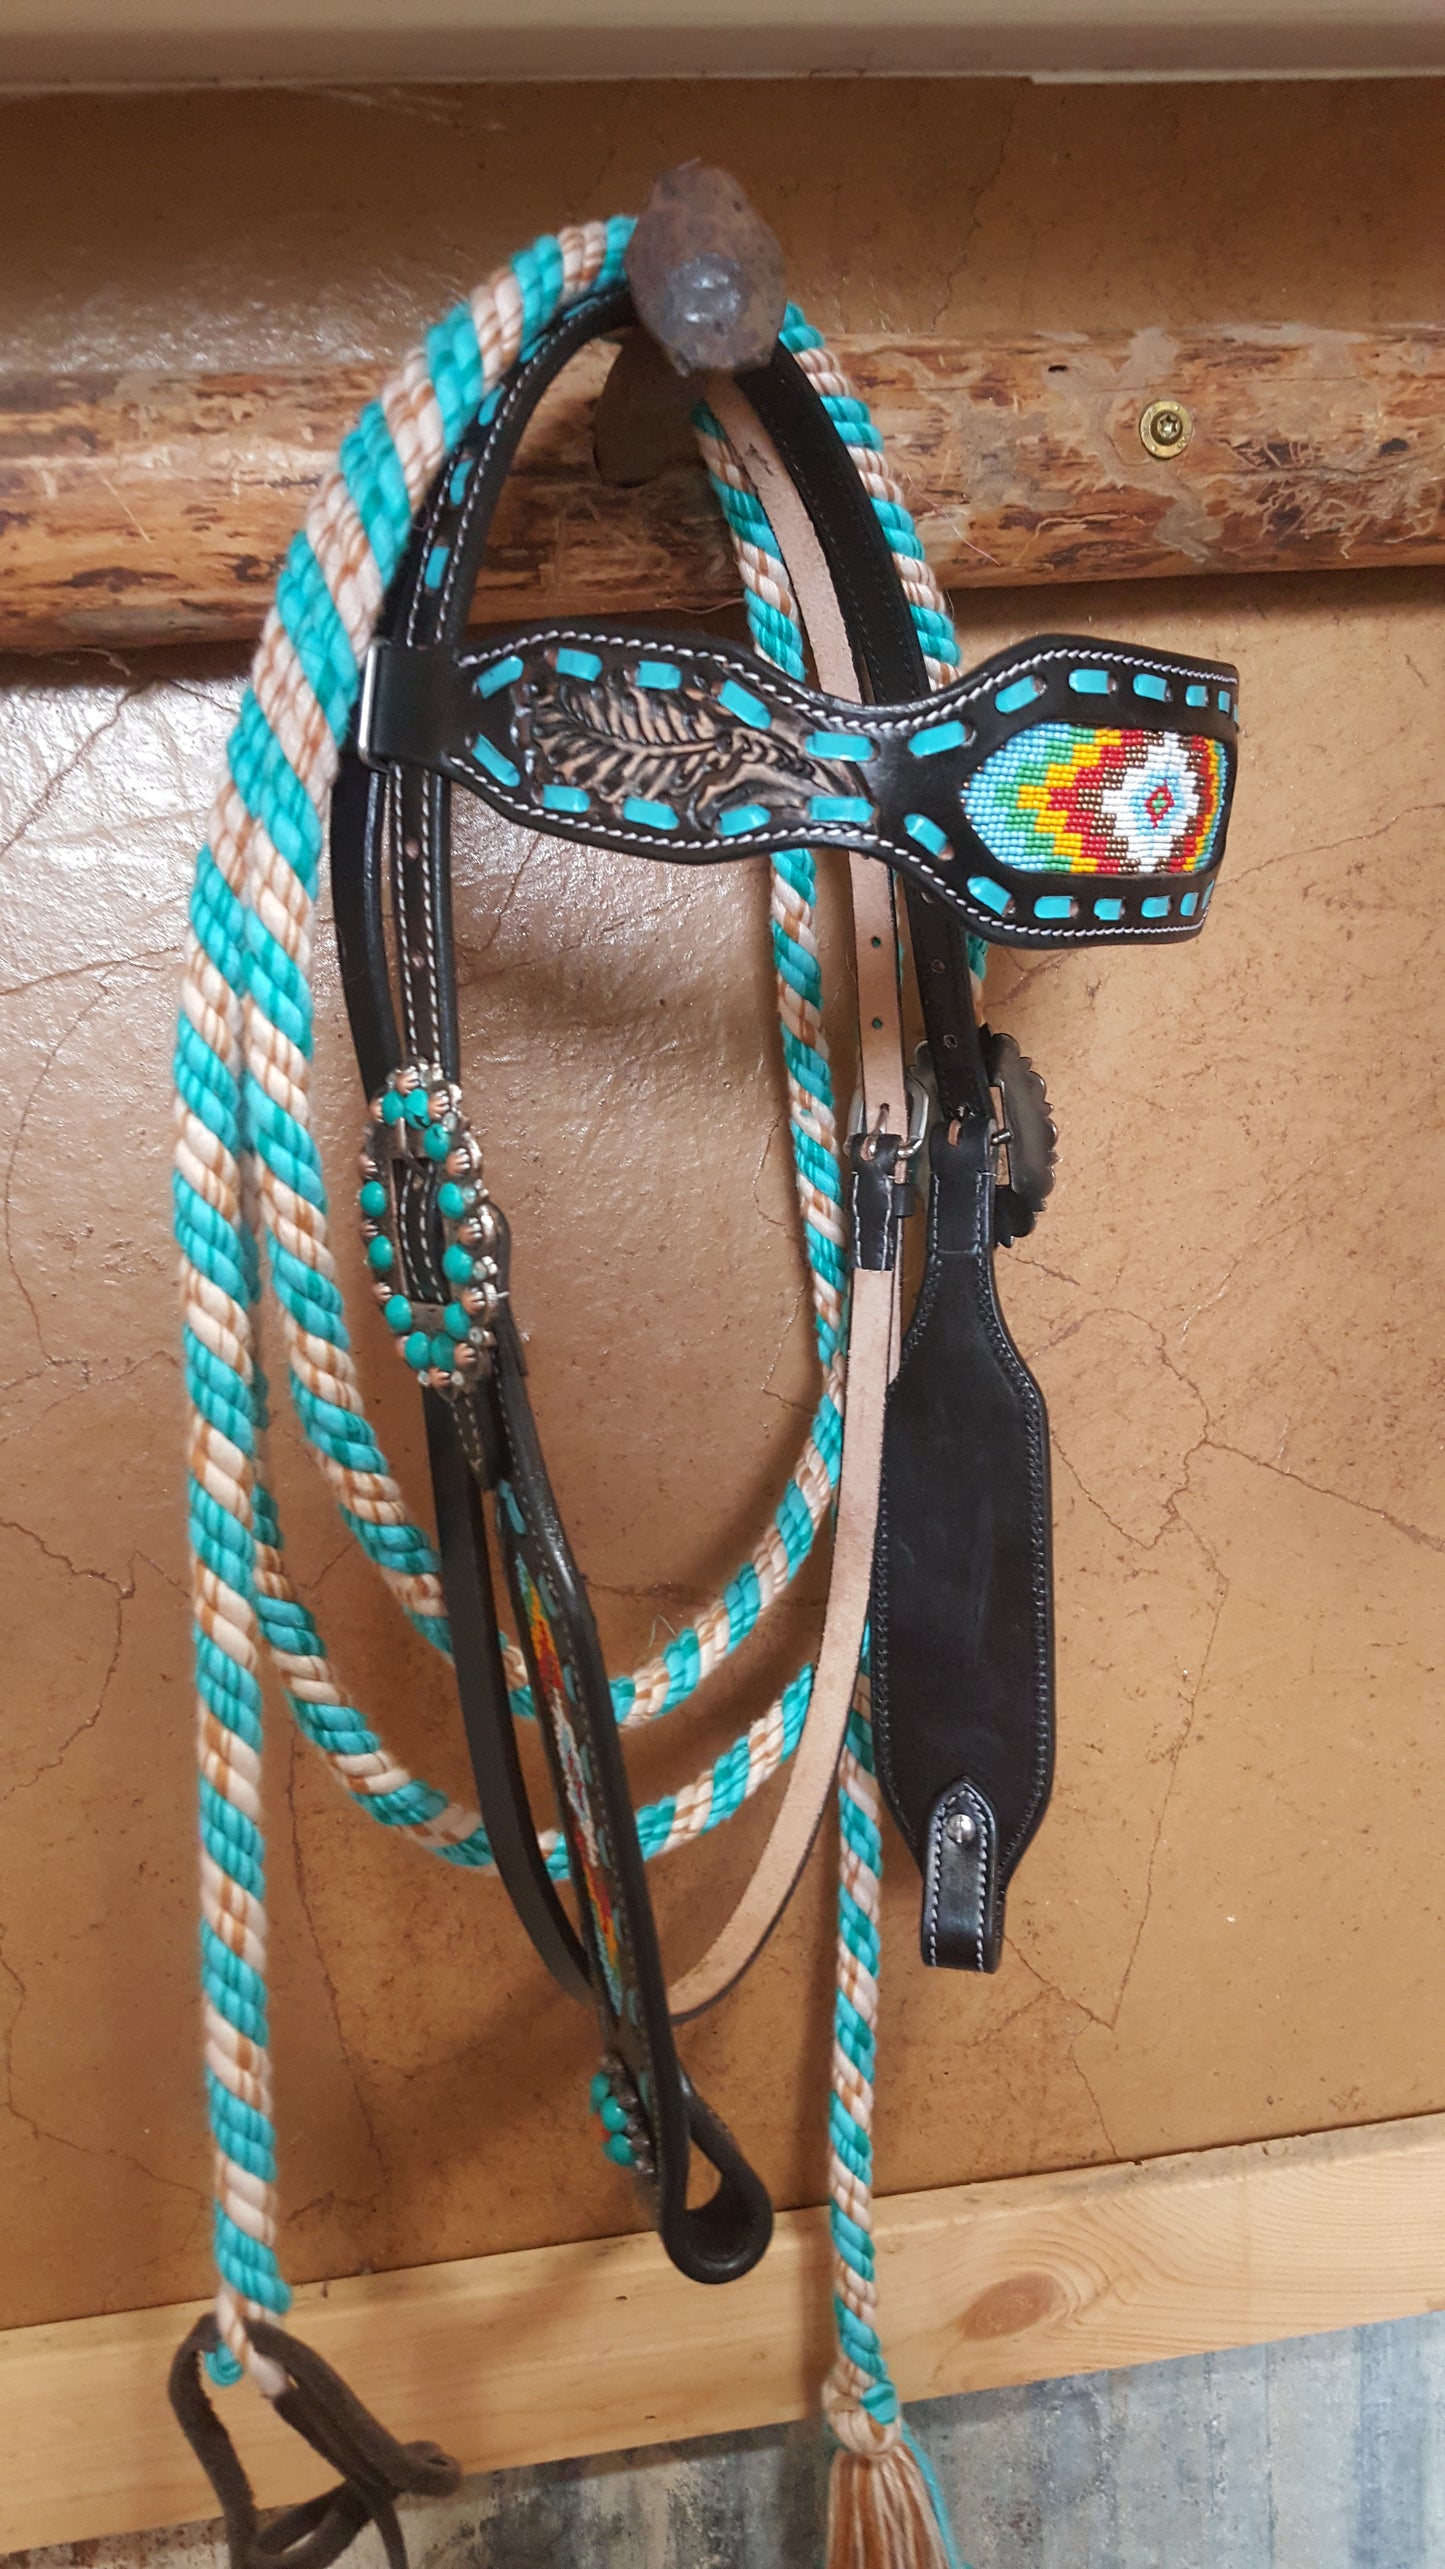 Beads and Turquoise Browband Headstall